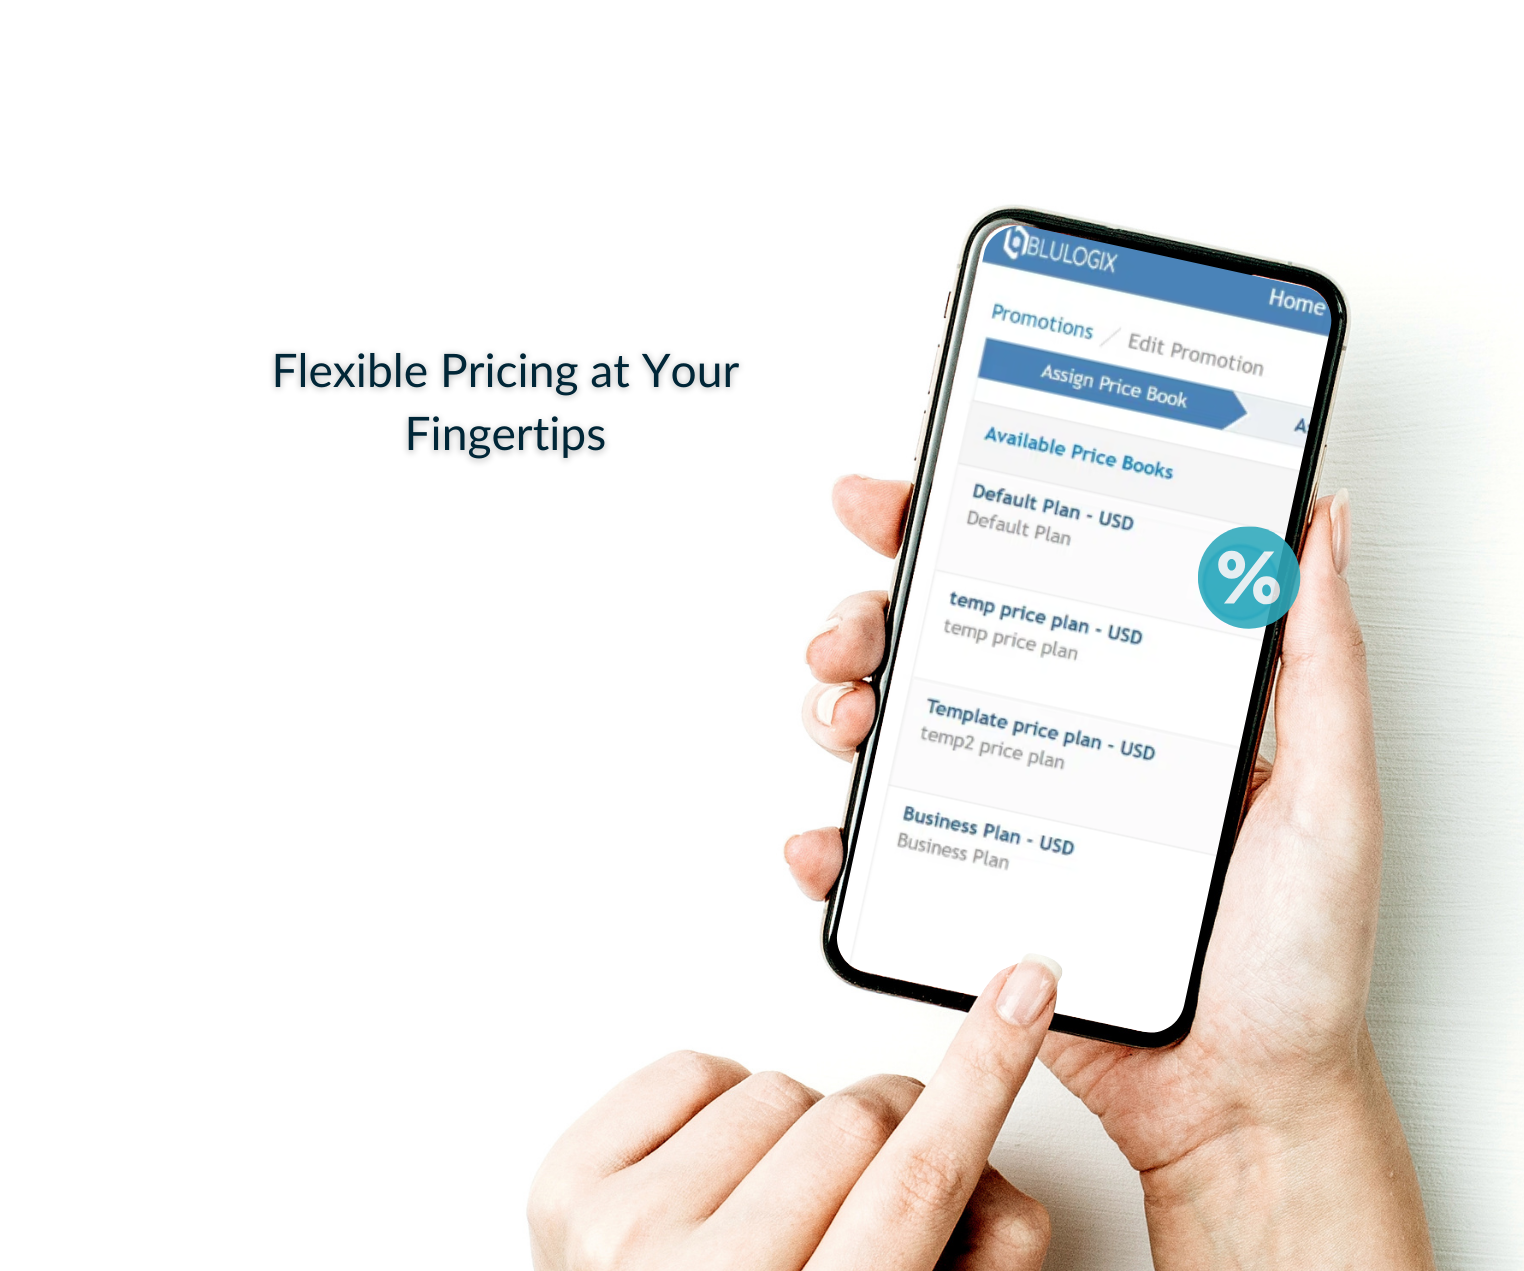 Flexible Pricing at Your Fingertips